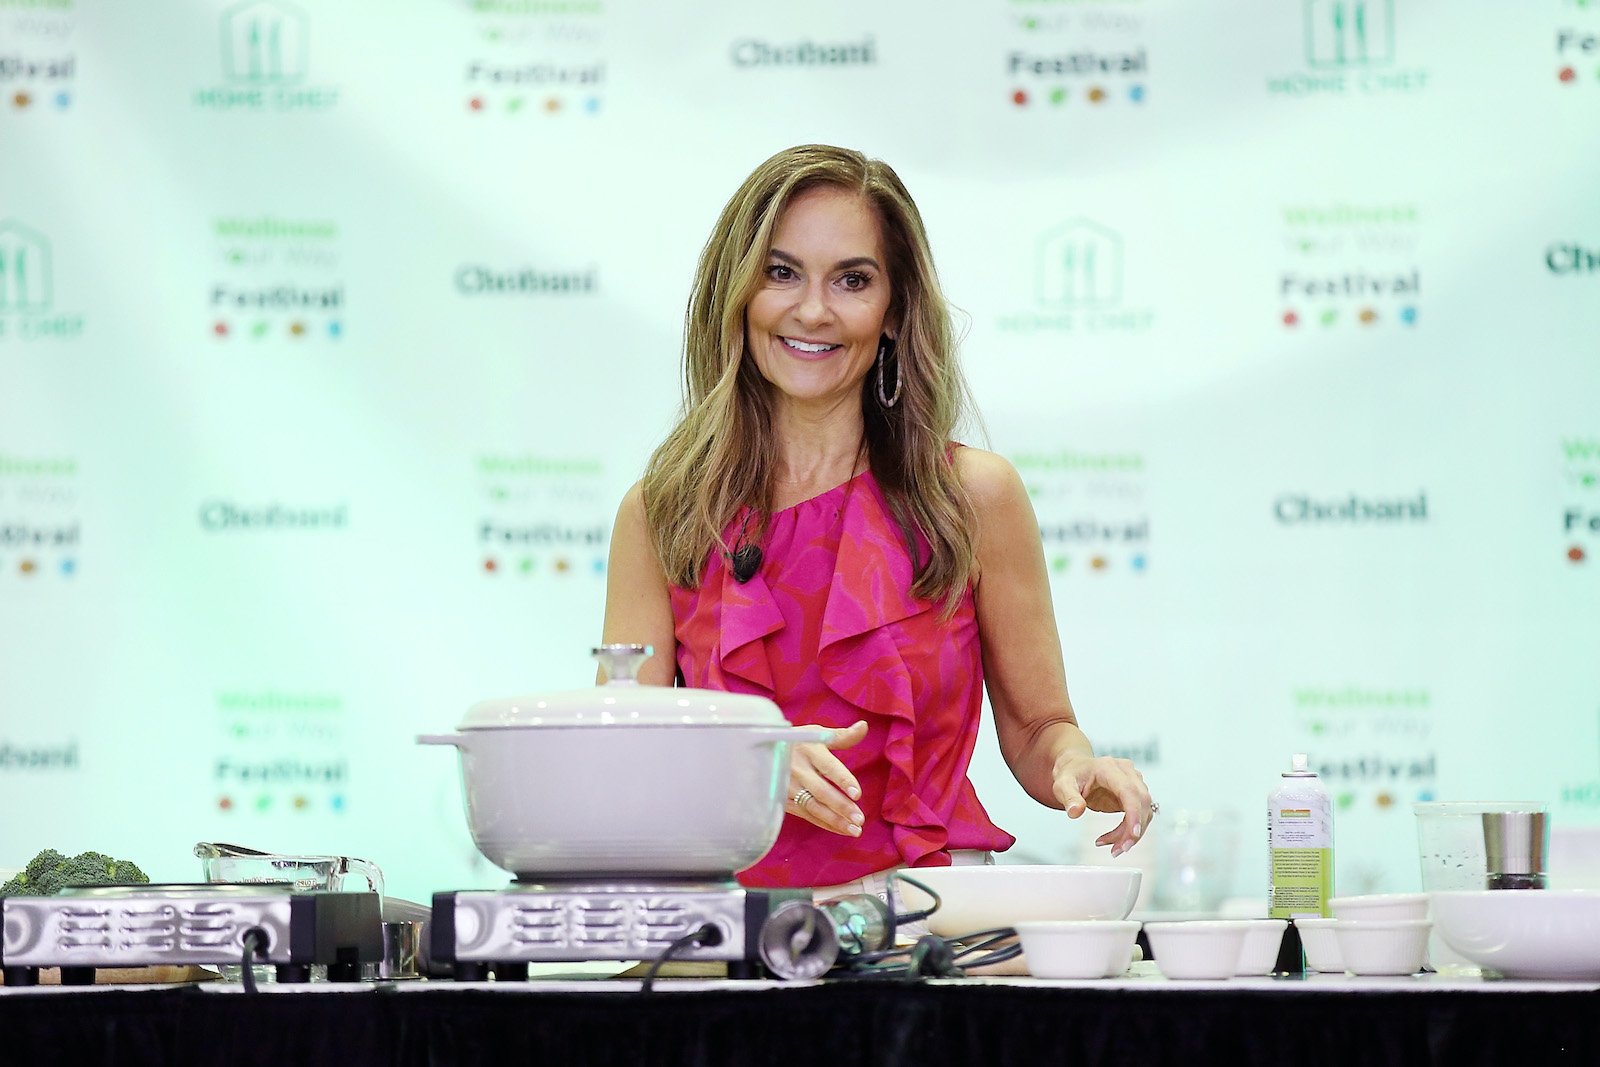 Joy Bauer from The Today Show takes part in a cooking demo in Cincinnati, Ohio